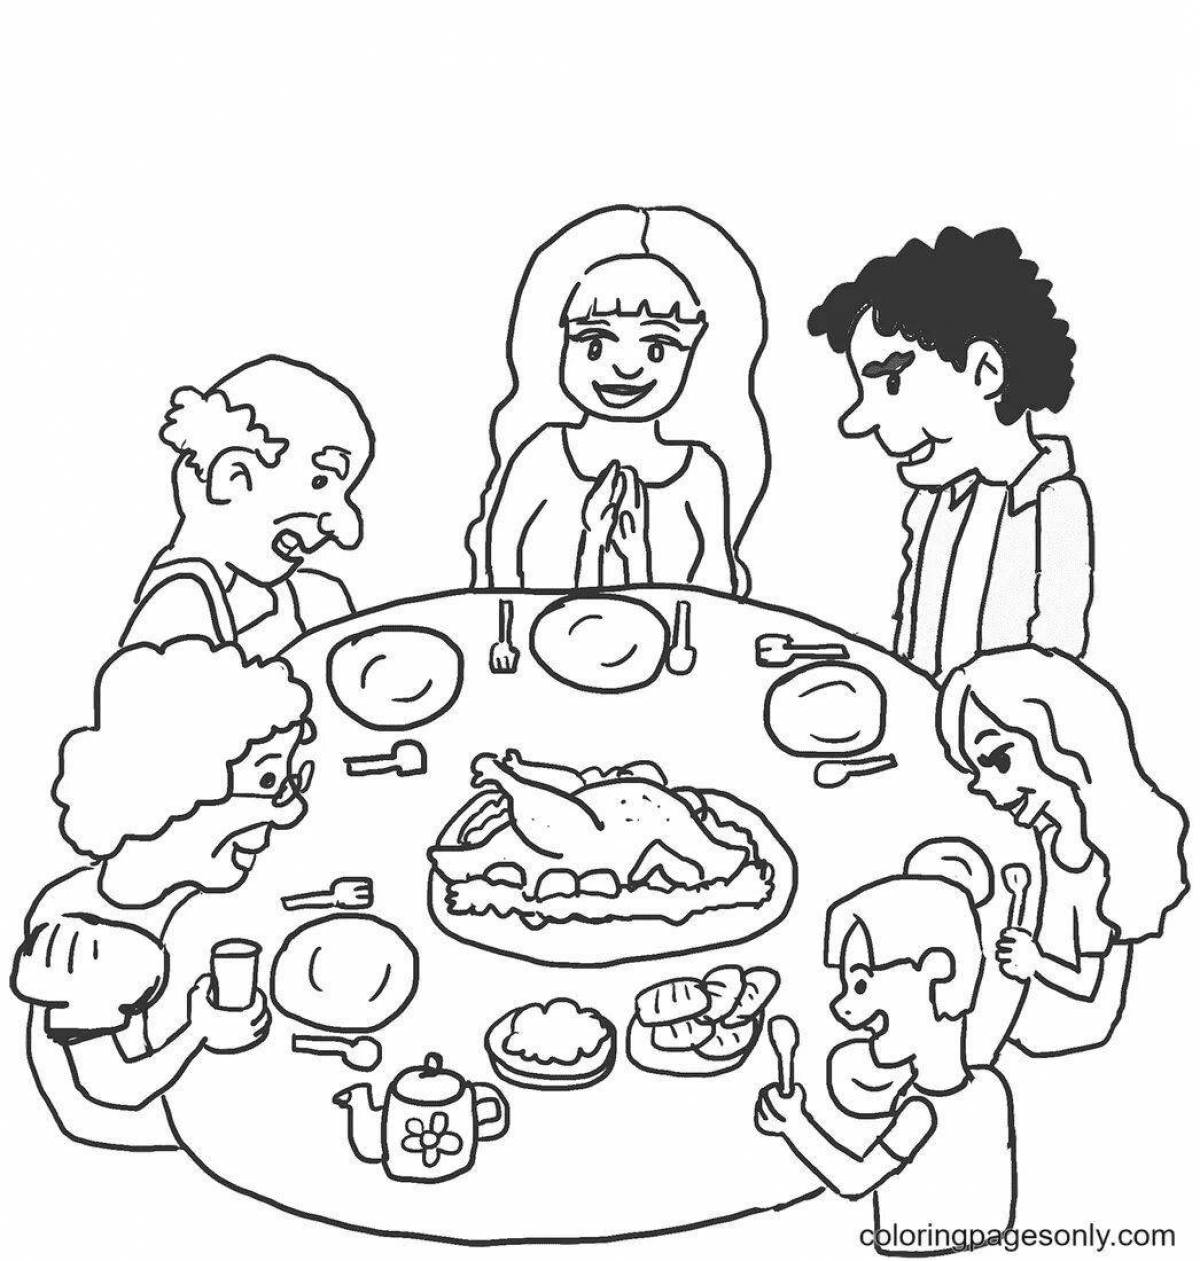 Children's holiday table coloring page